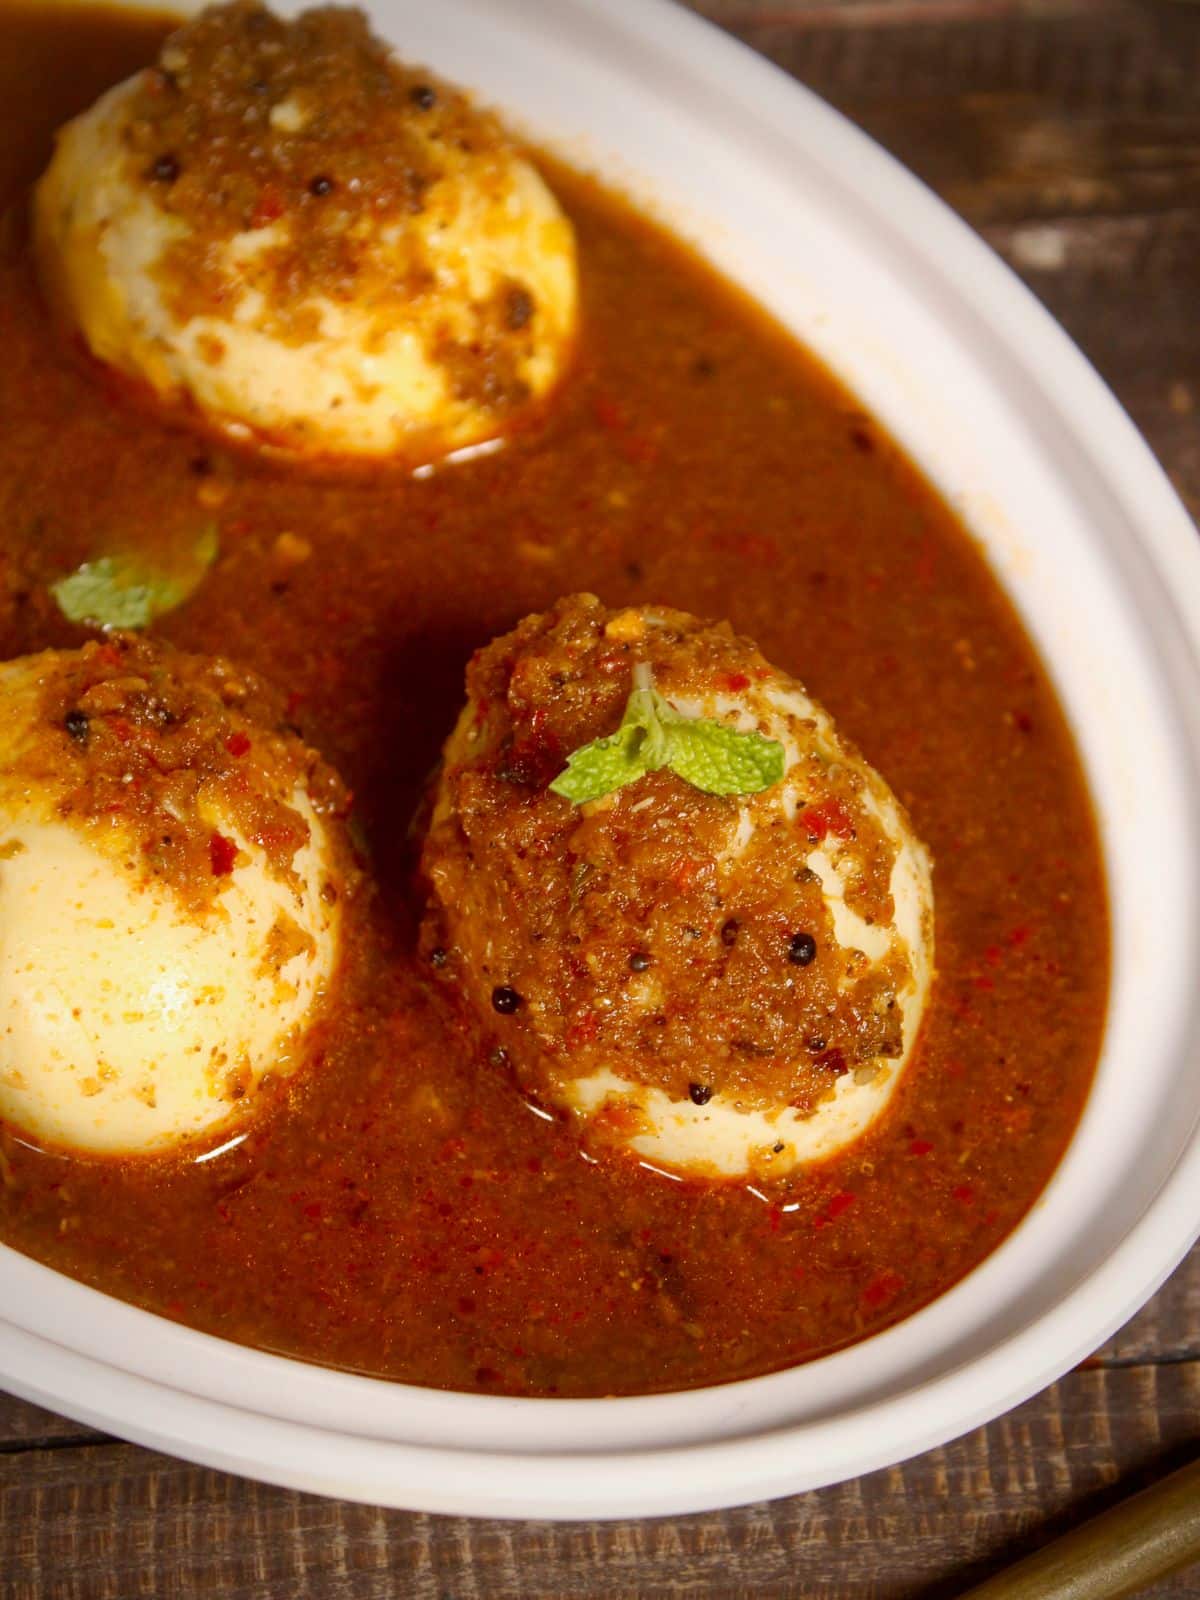 Classic Chettinad style egg curry